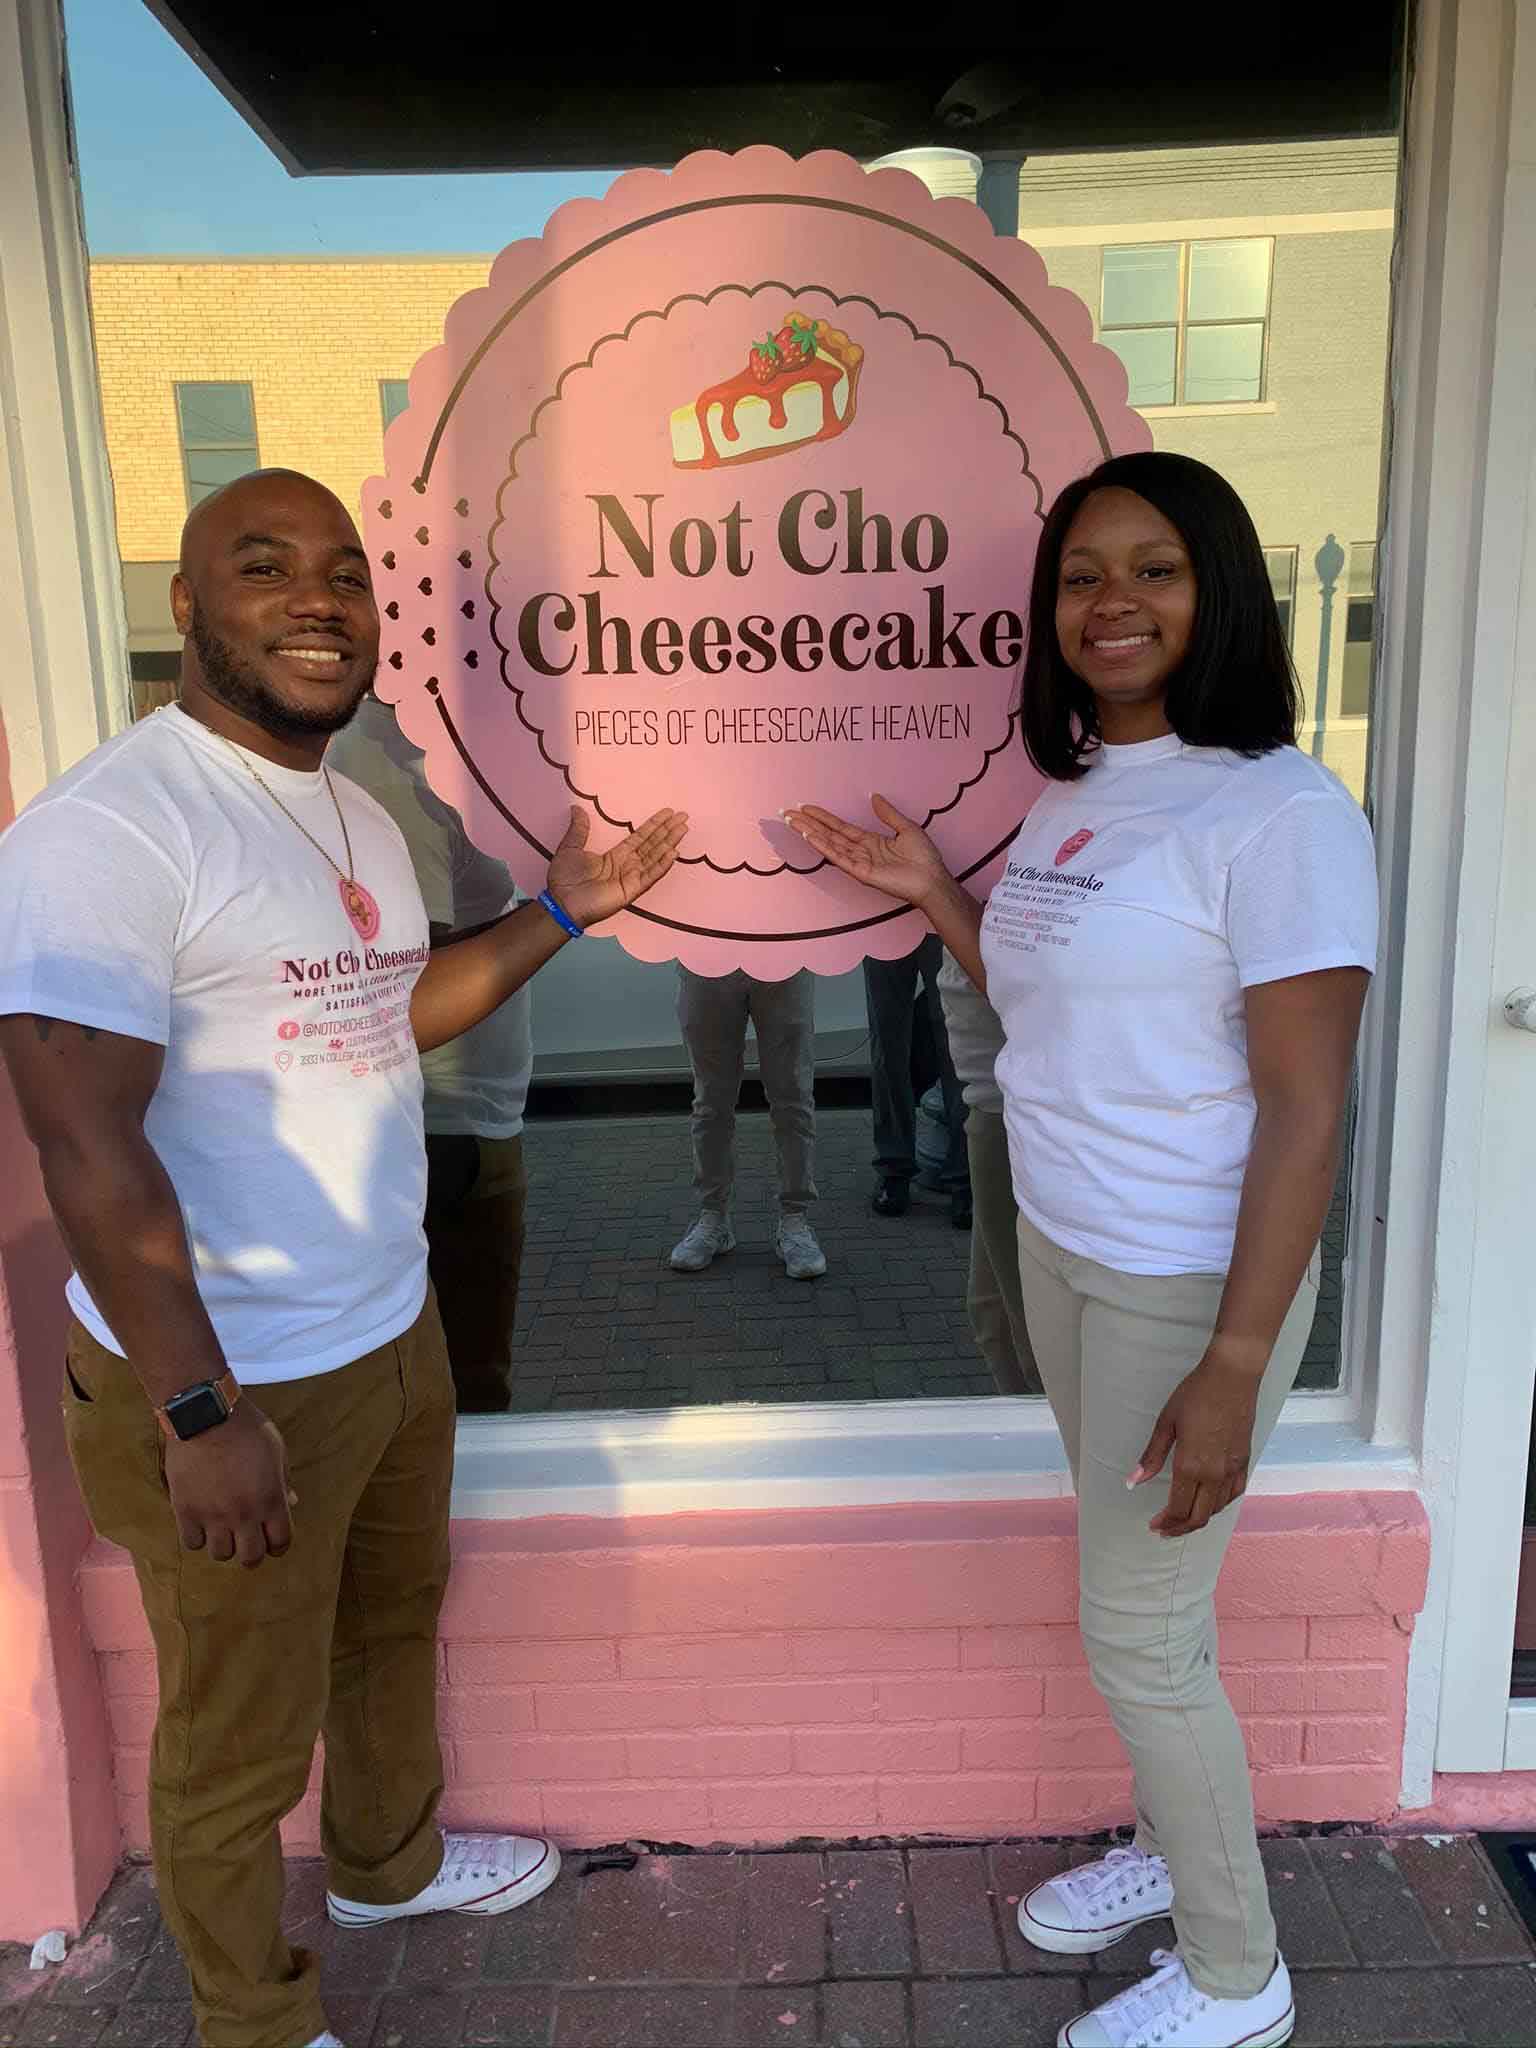 Co-owners Glen Whitaker and ShoShianna Moore of Not Cho Cheesecake